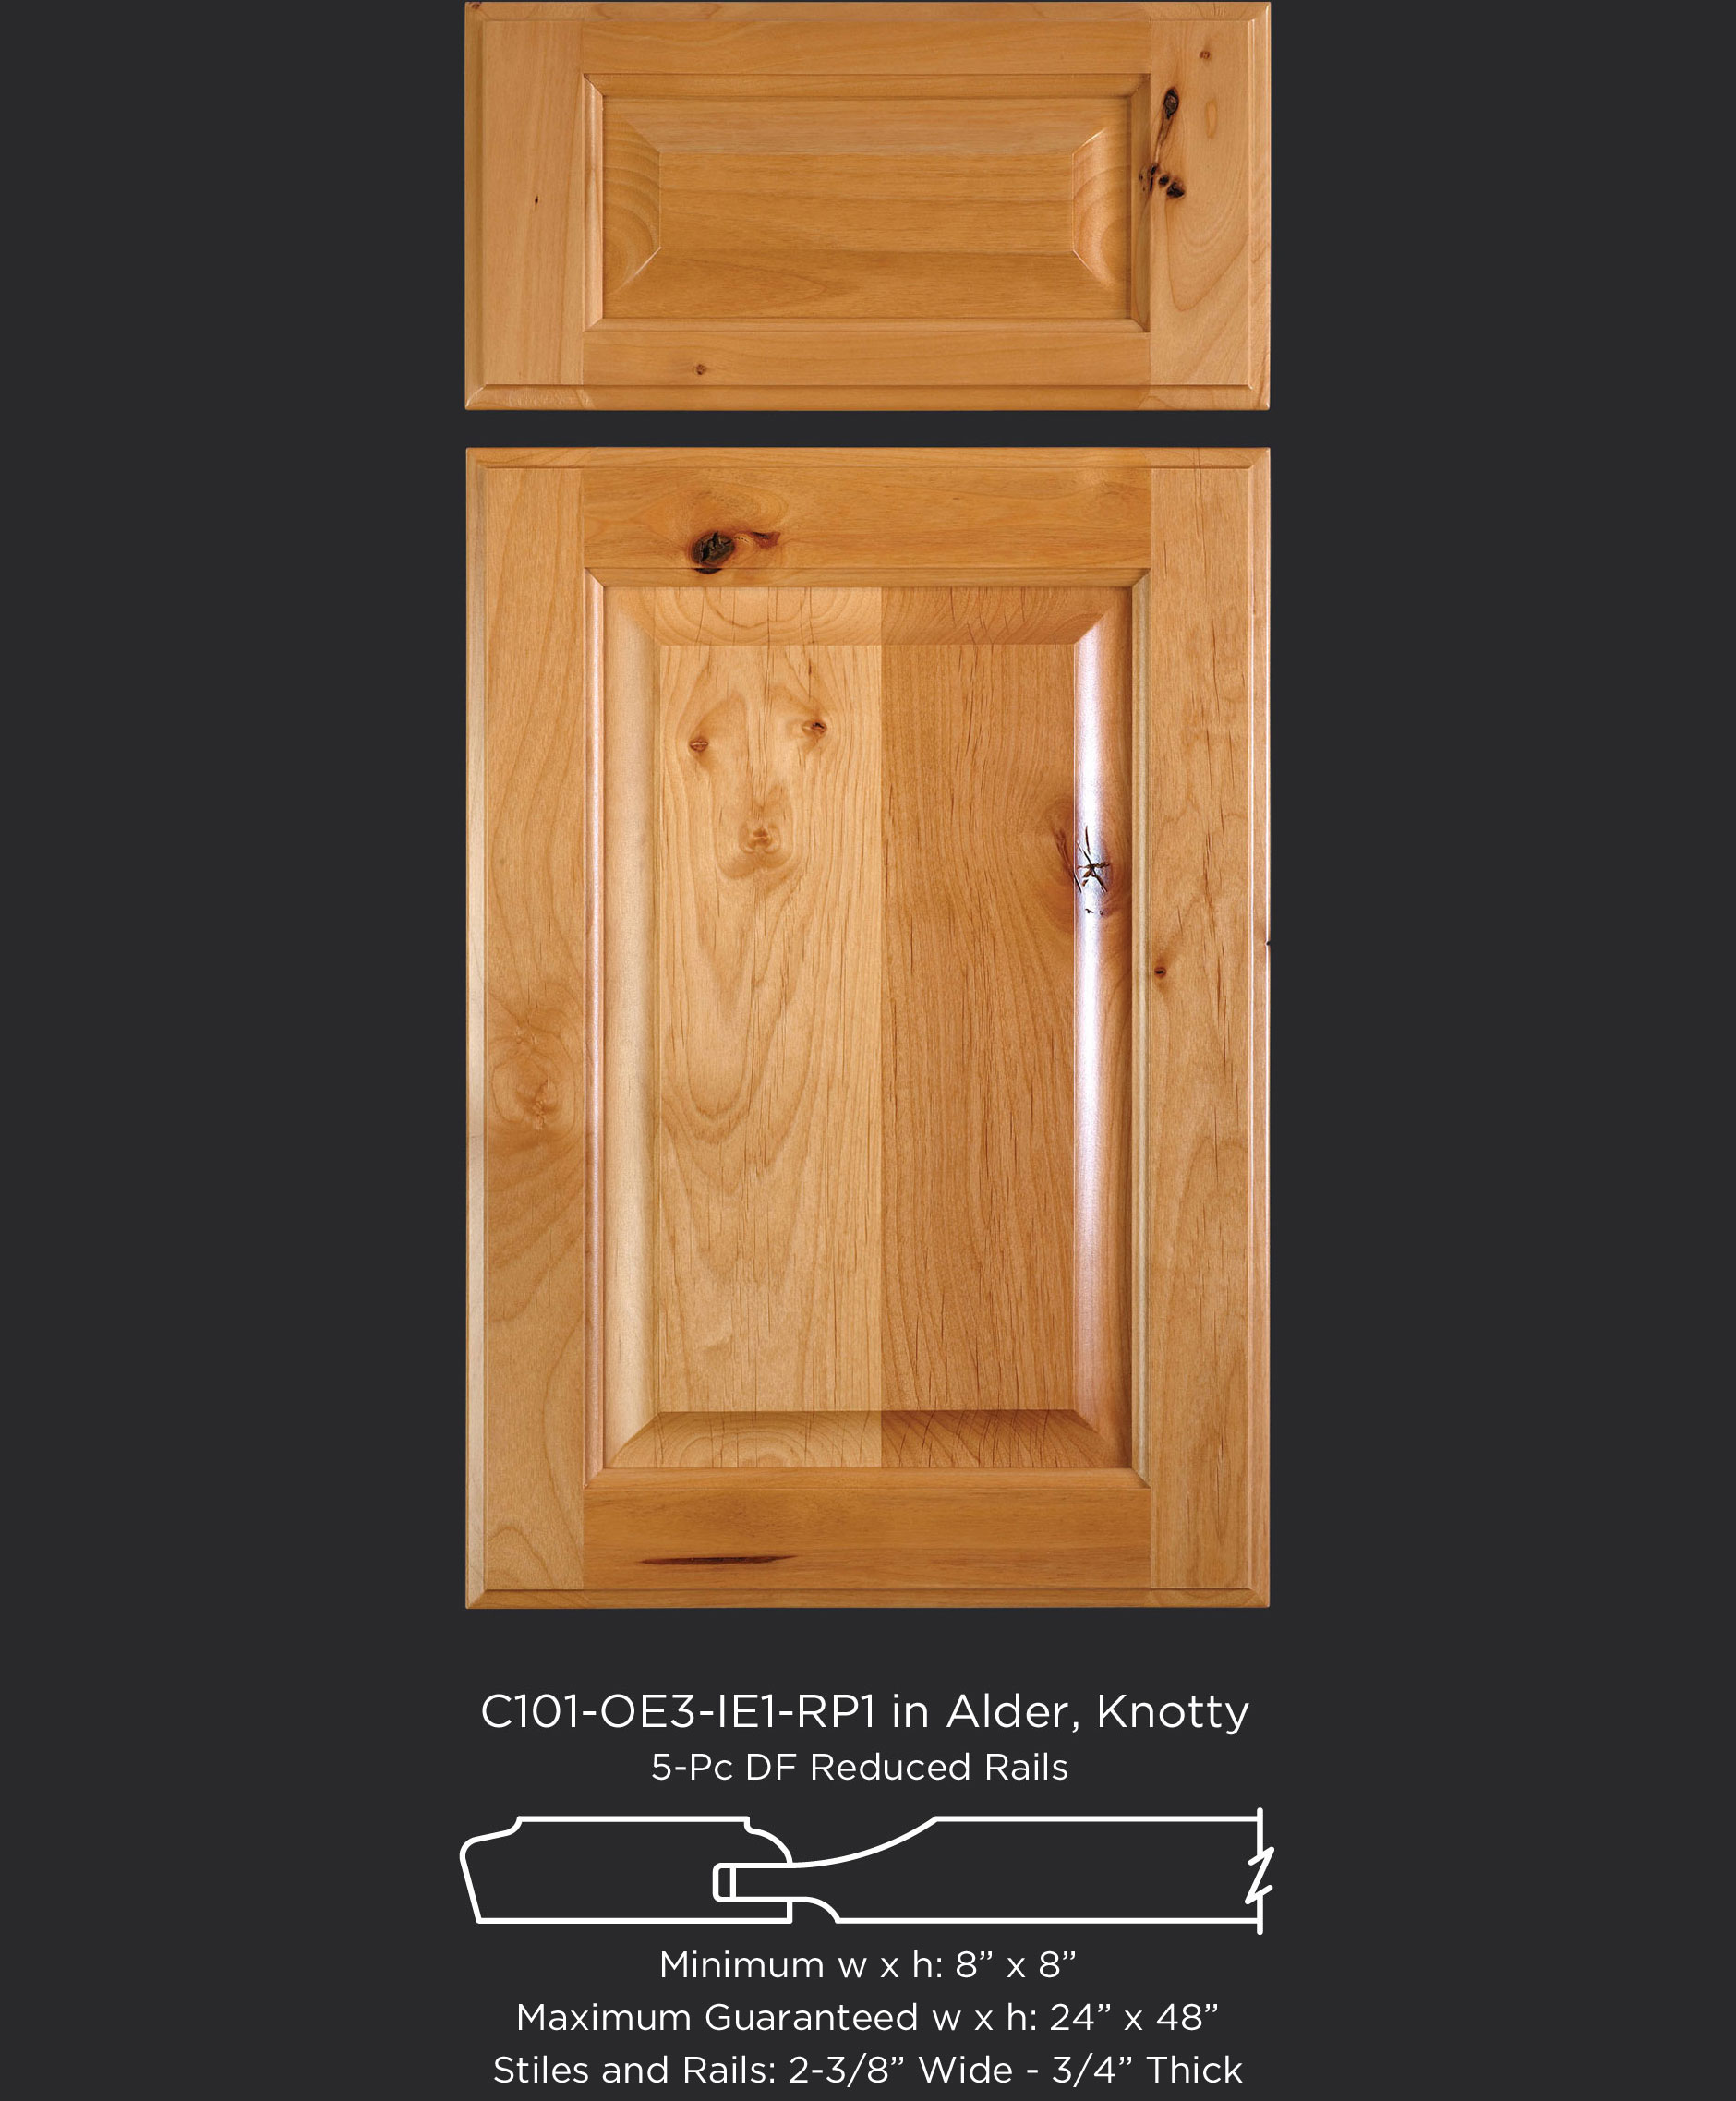 Cope and Stick Cabinet Door C101 OE3-IE1-RP1 in Alder, Knotty - 5-piece drawer front with reduced rails